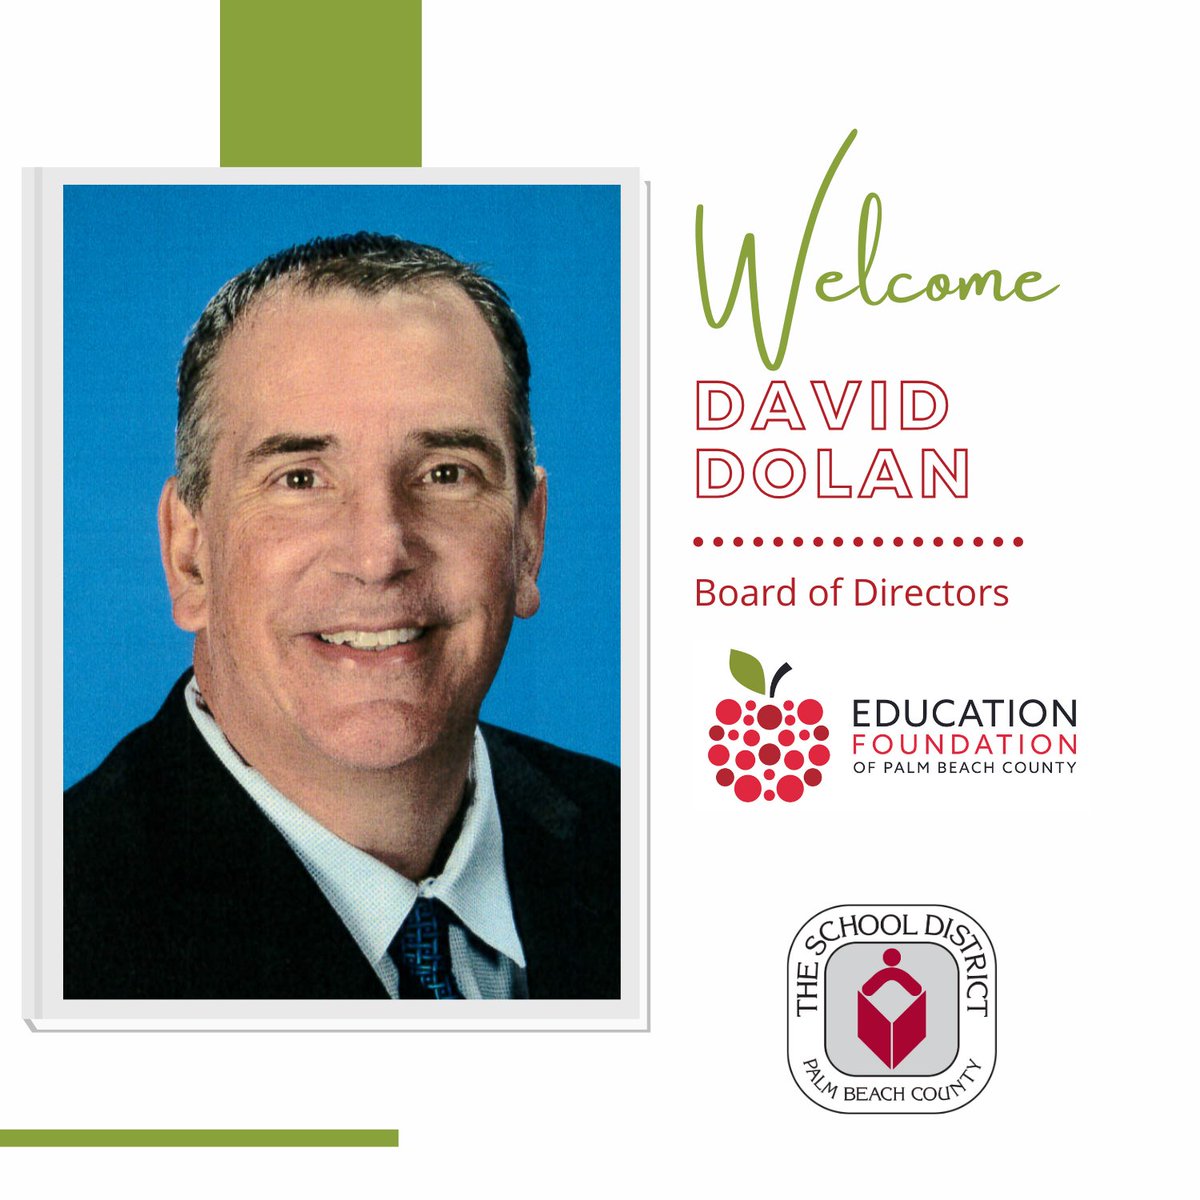 David Dolan joins our Board of Directors, and we couldn't be more thrilled! Bringing with him a robust portfolio, David's unique blend of skills in architecture, civil engineering, & facilities management will surely pave new paths for educational development. #WelcomeWednesday